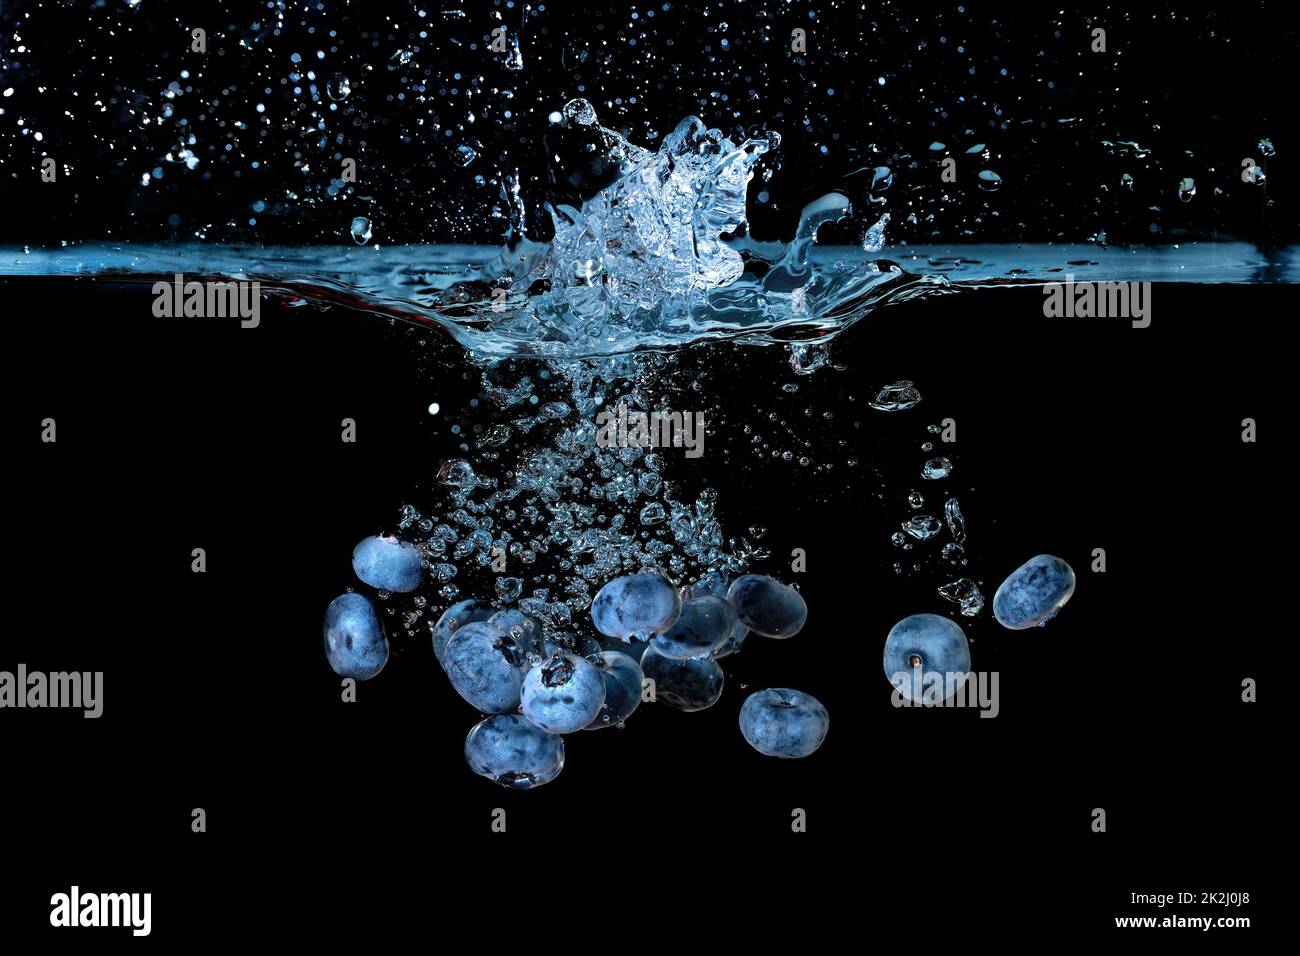 Bunch of fresh ripe blueberries dropped in water with air bubbles and splashes isolated on black background. Stock Photo